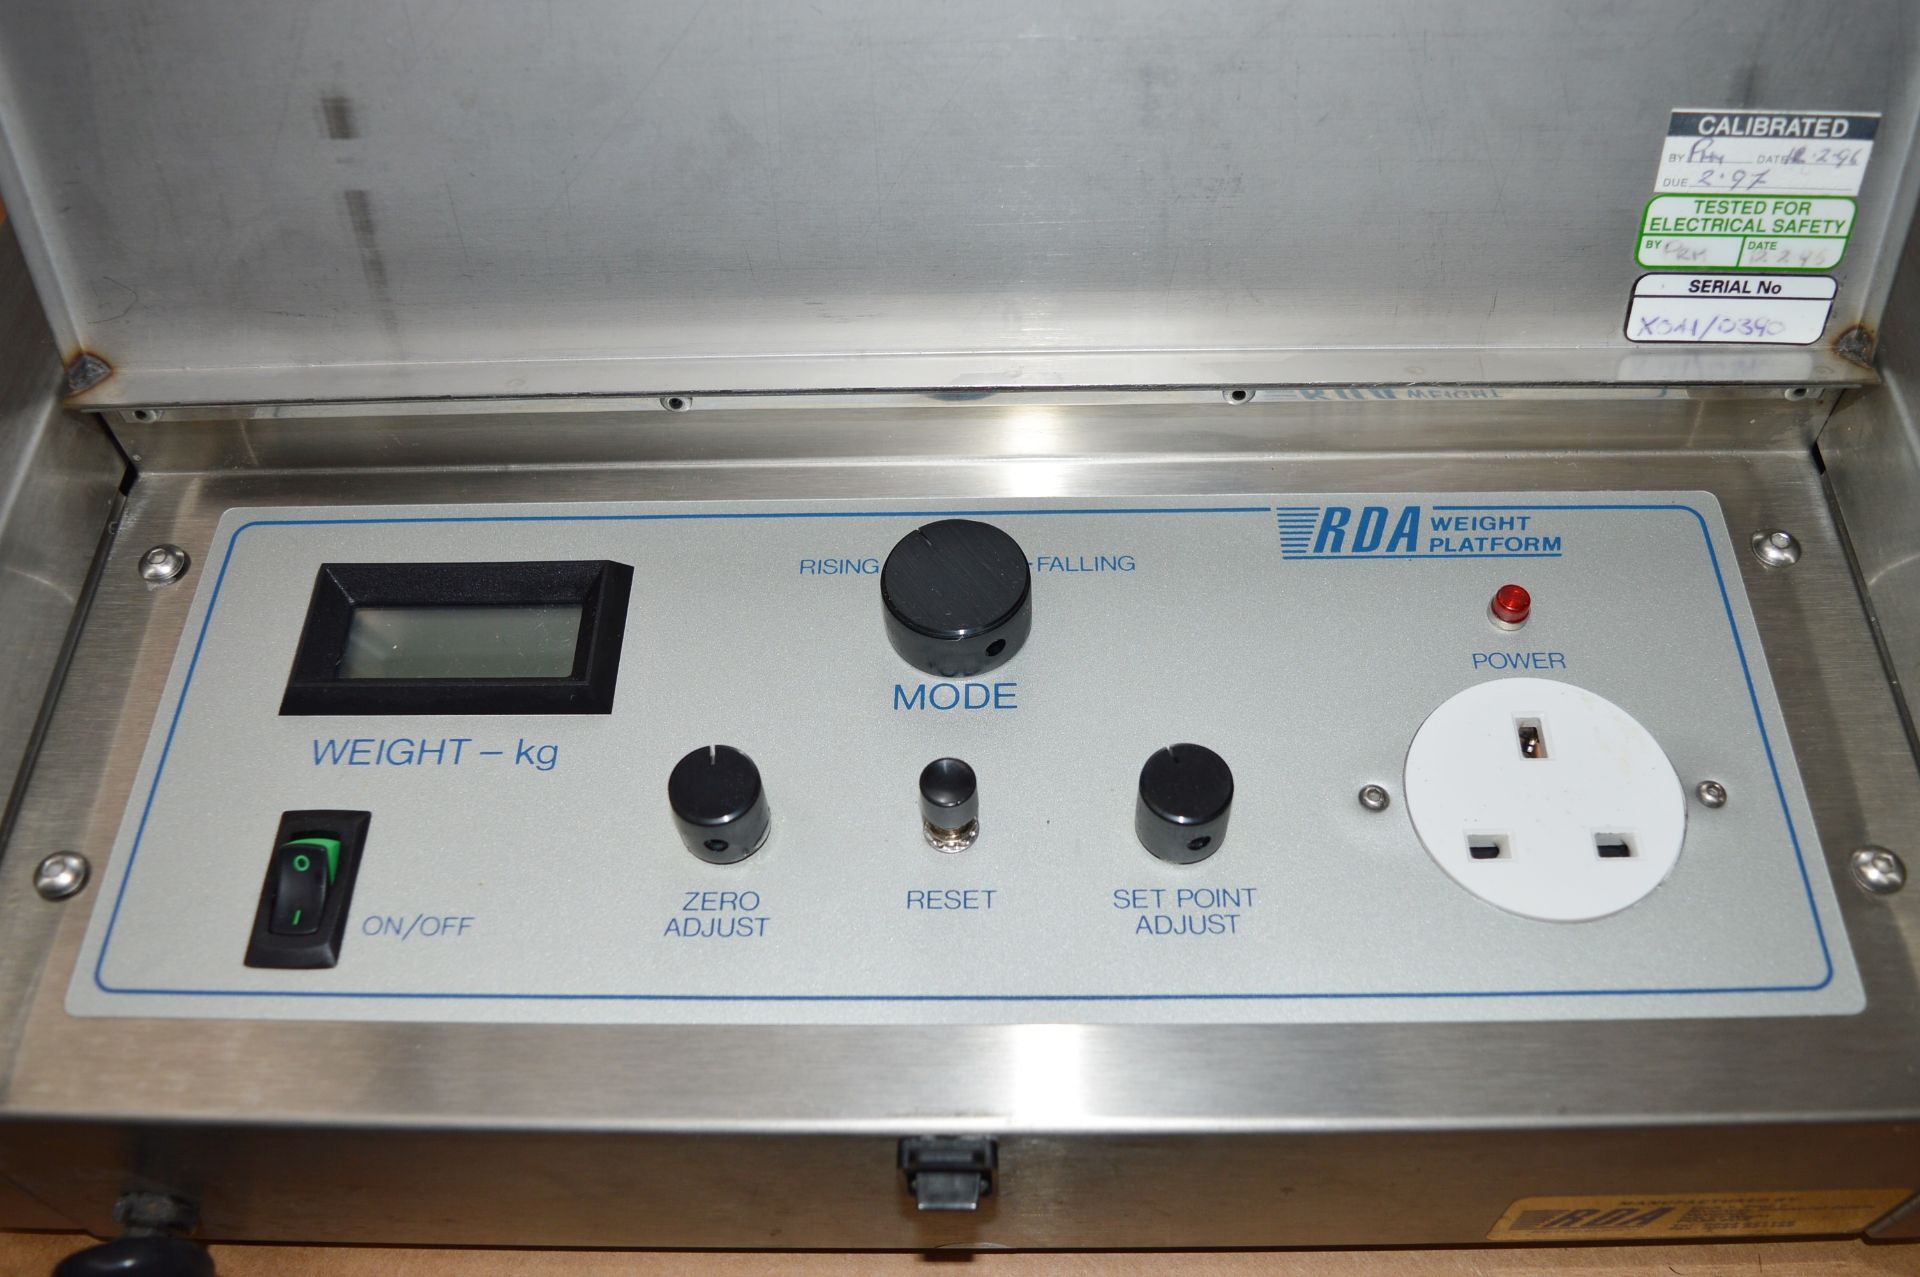 1 x RDA Professional Weight Platform Scale - CL011 - Designed For Refilling Refrigerant Cylinders, - Image 9 of 12